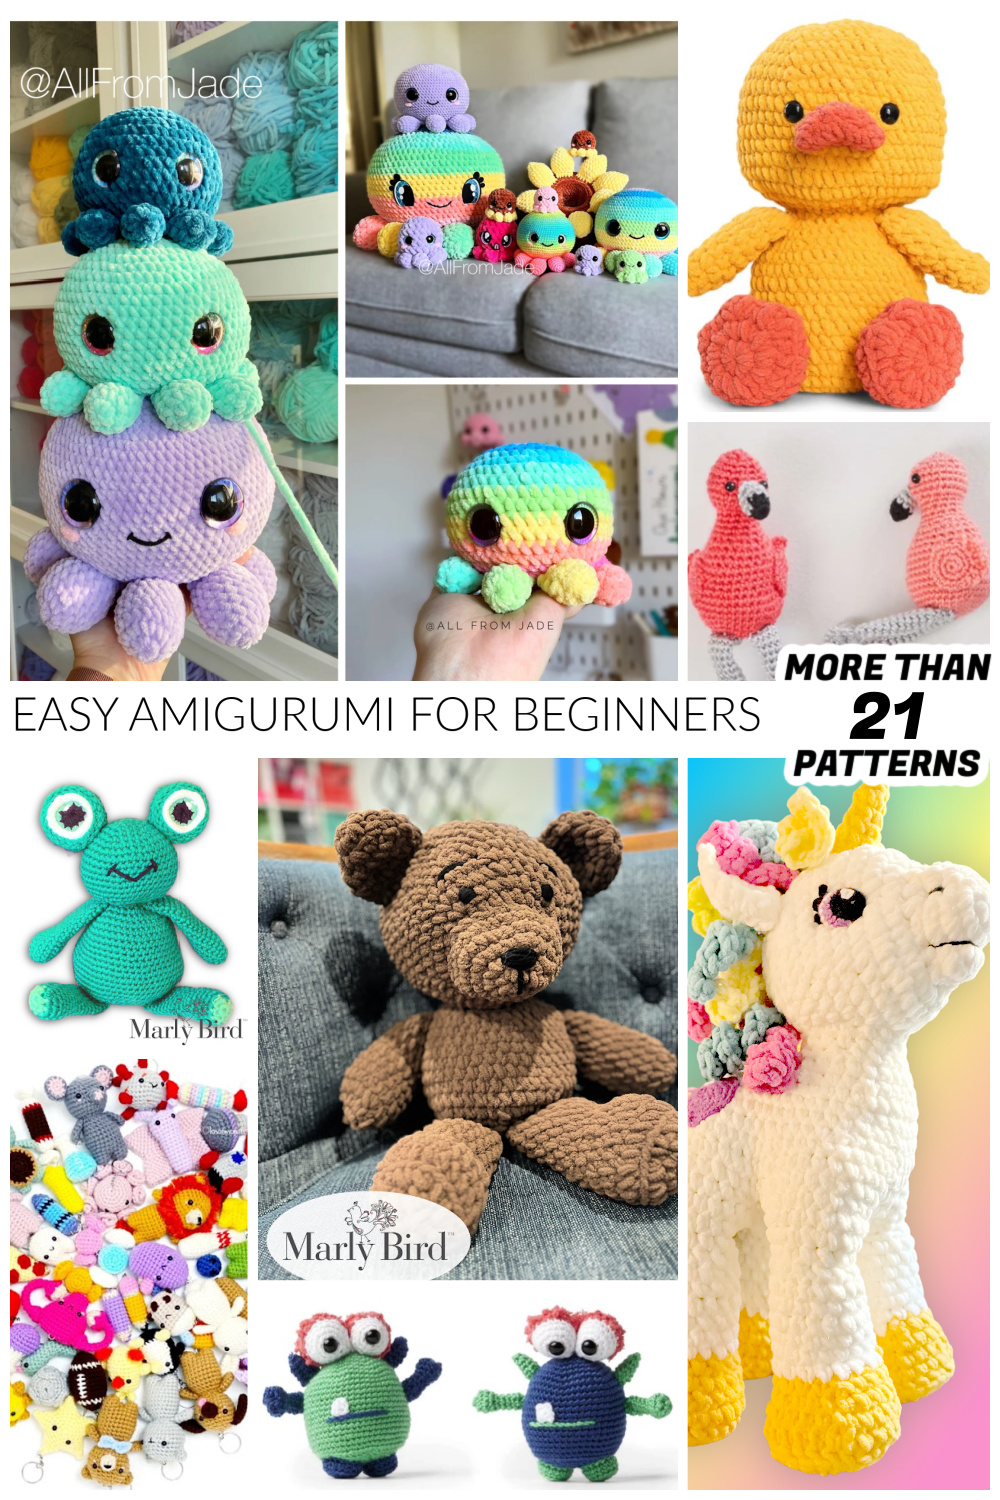 A collage showcasing various easy amigurumi animals, including octopuses, cats, a bear, ducks, flamingos, a frog, owls, and a unicorn. The text "Easy Amigurumi for Beginners - More Than 21 Patterns" is displayed across the image. -Marly Bird